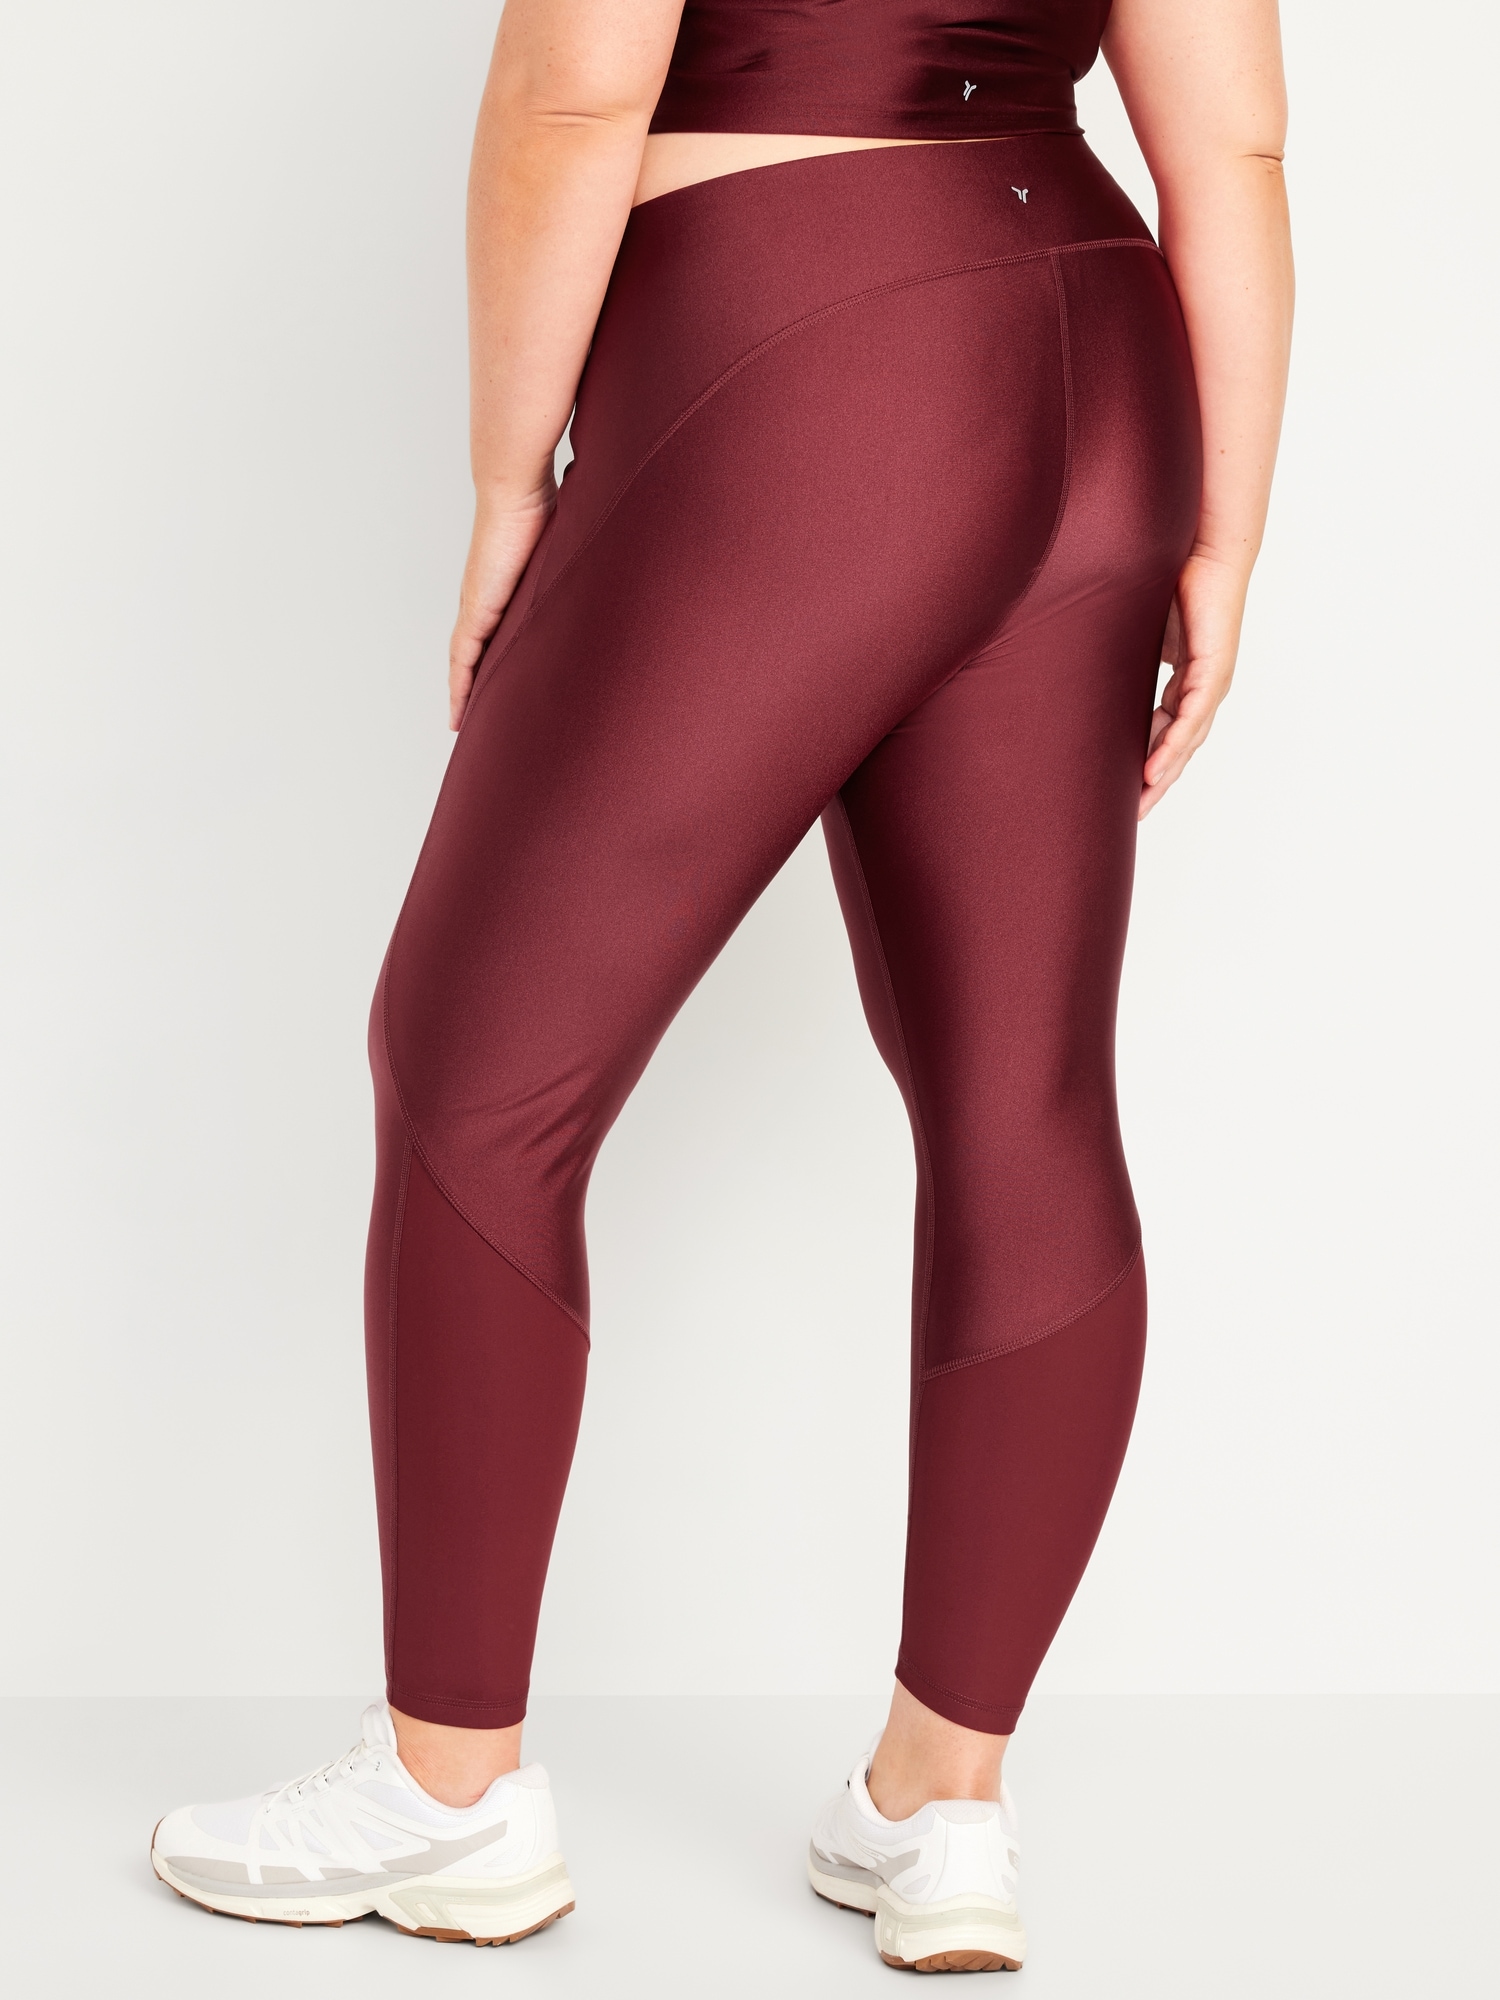 Excite Shopping - BRAND: Old Navy PRICE : $140.00 COLOR: Burgundy Floral  Leggings SIZE : M